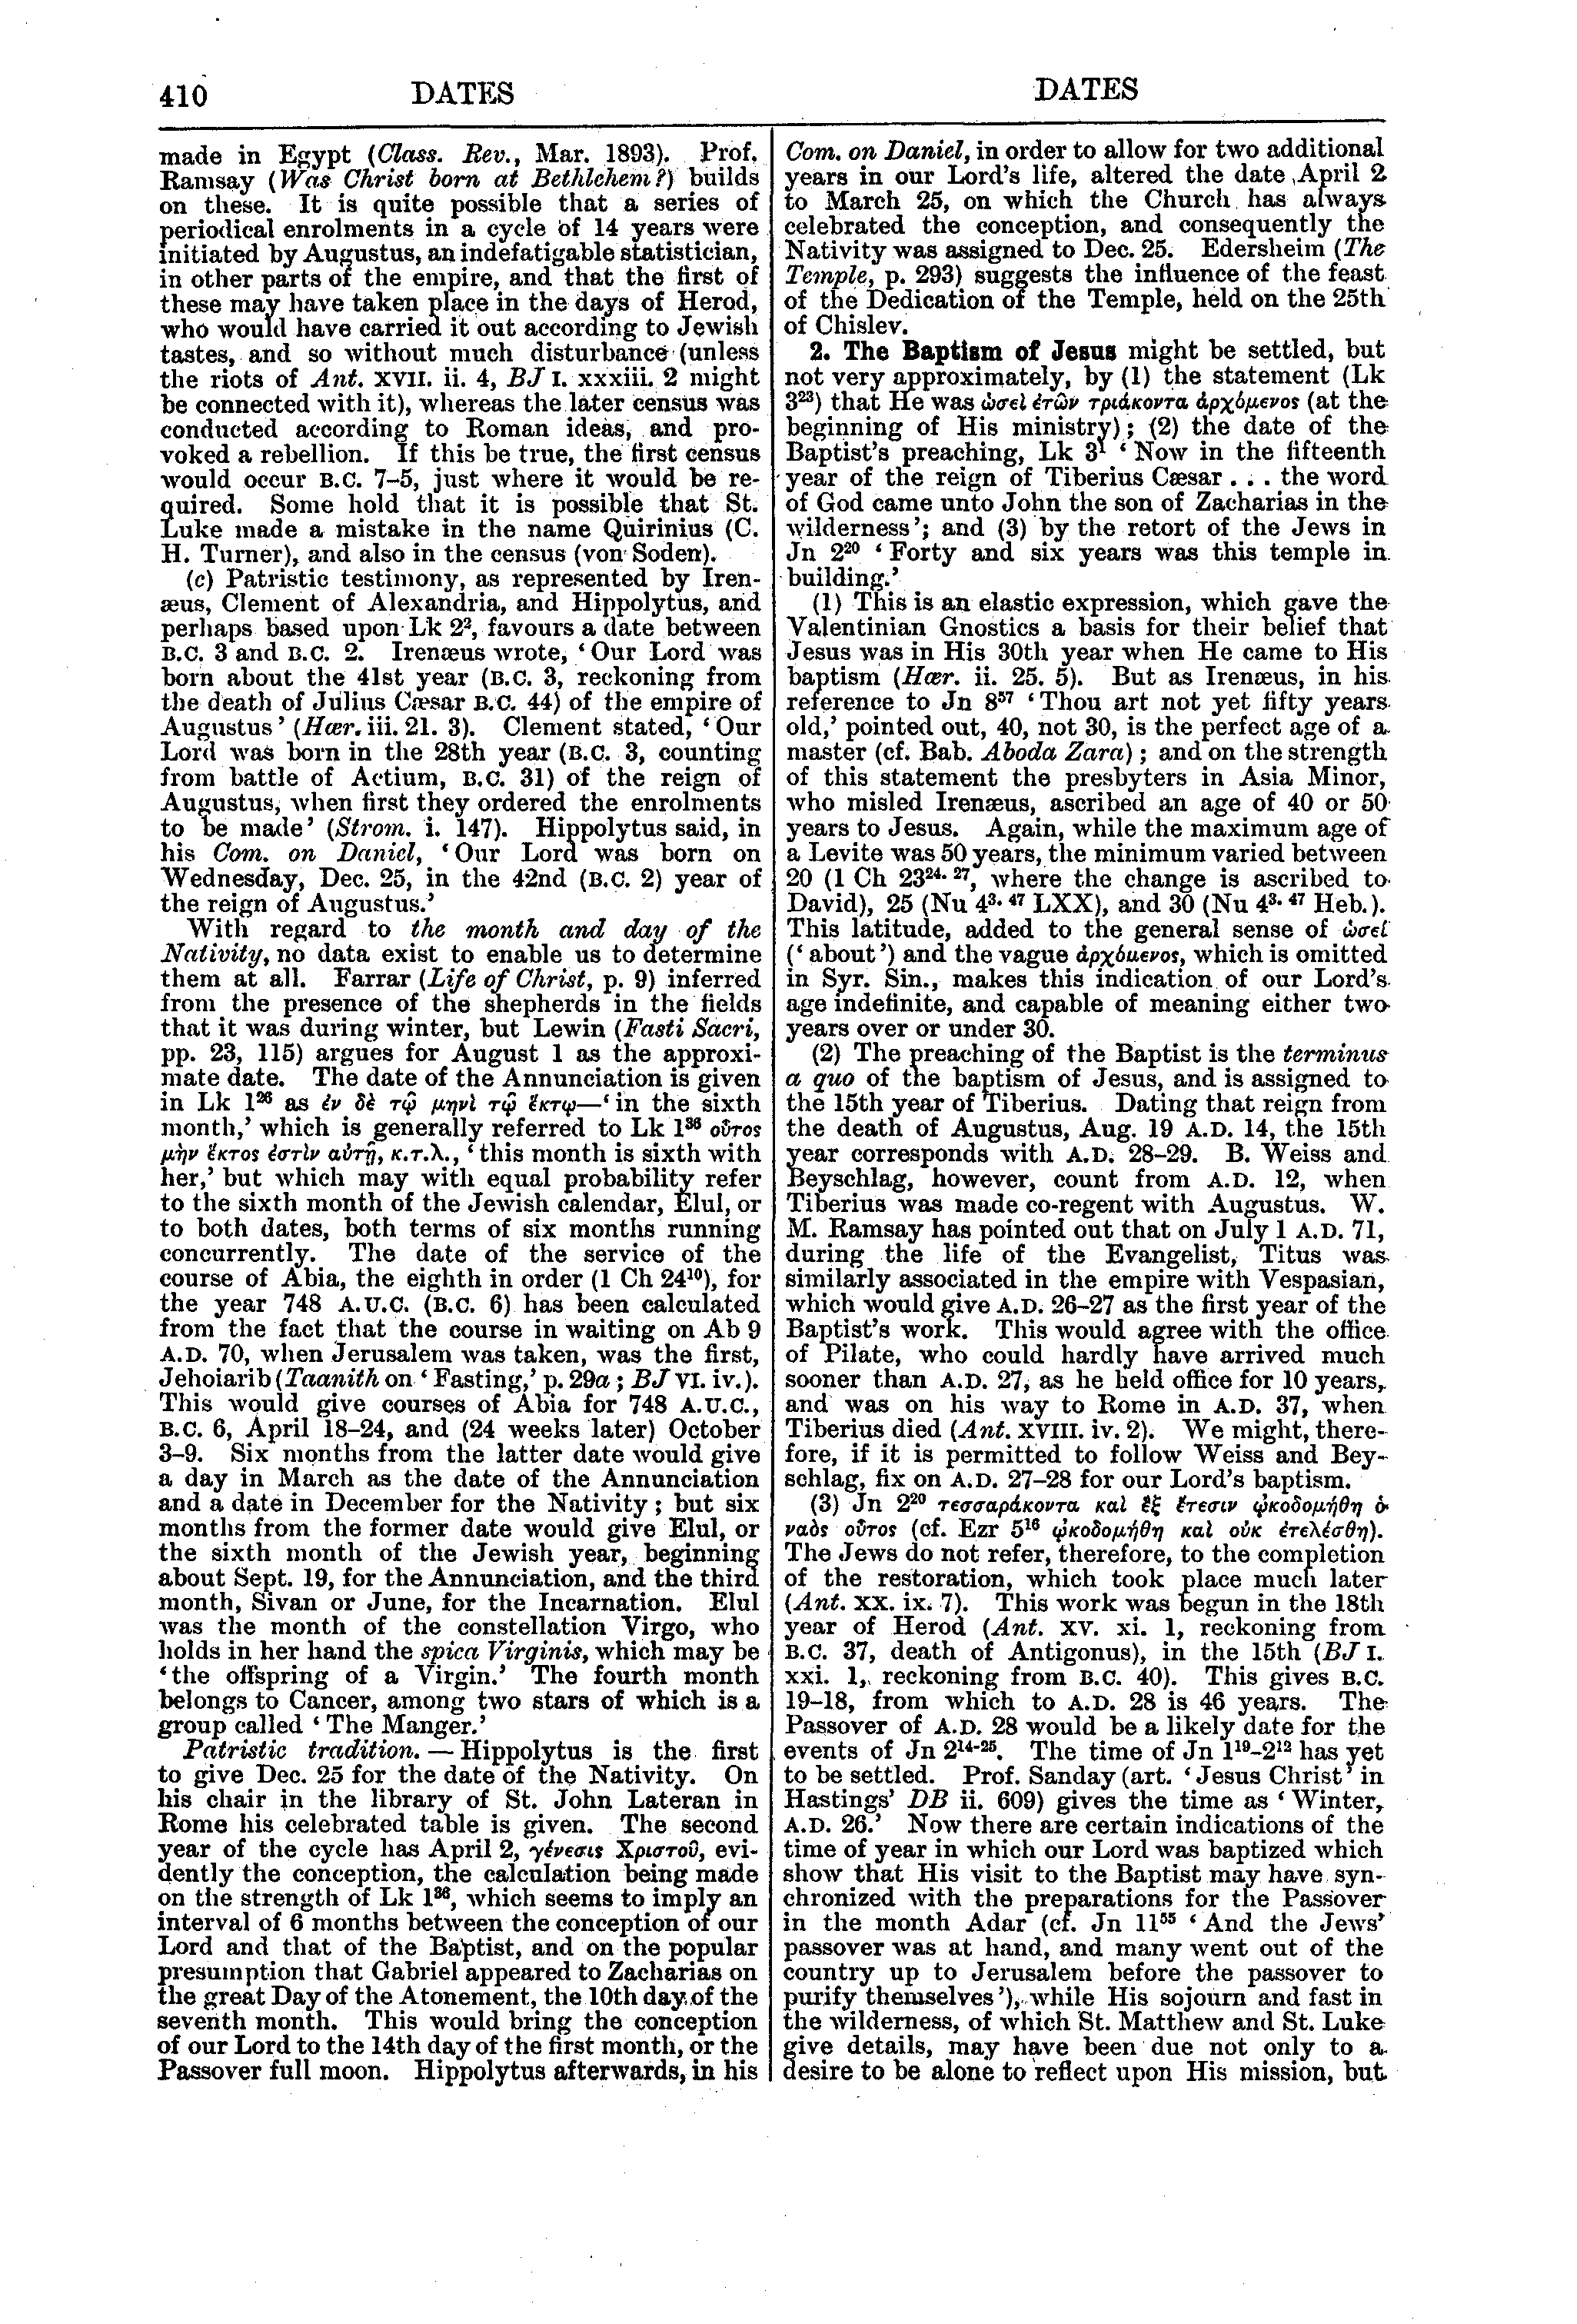 Image of page 410